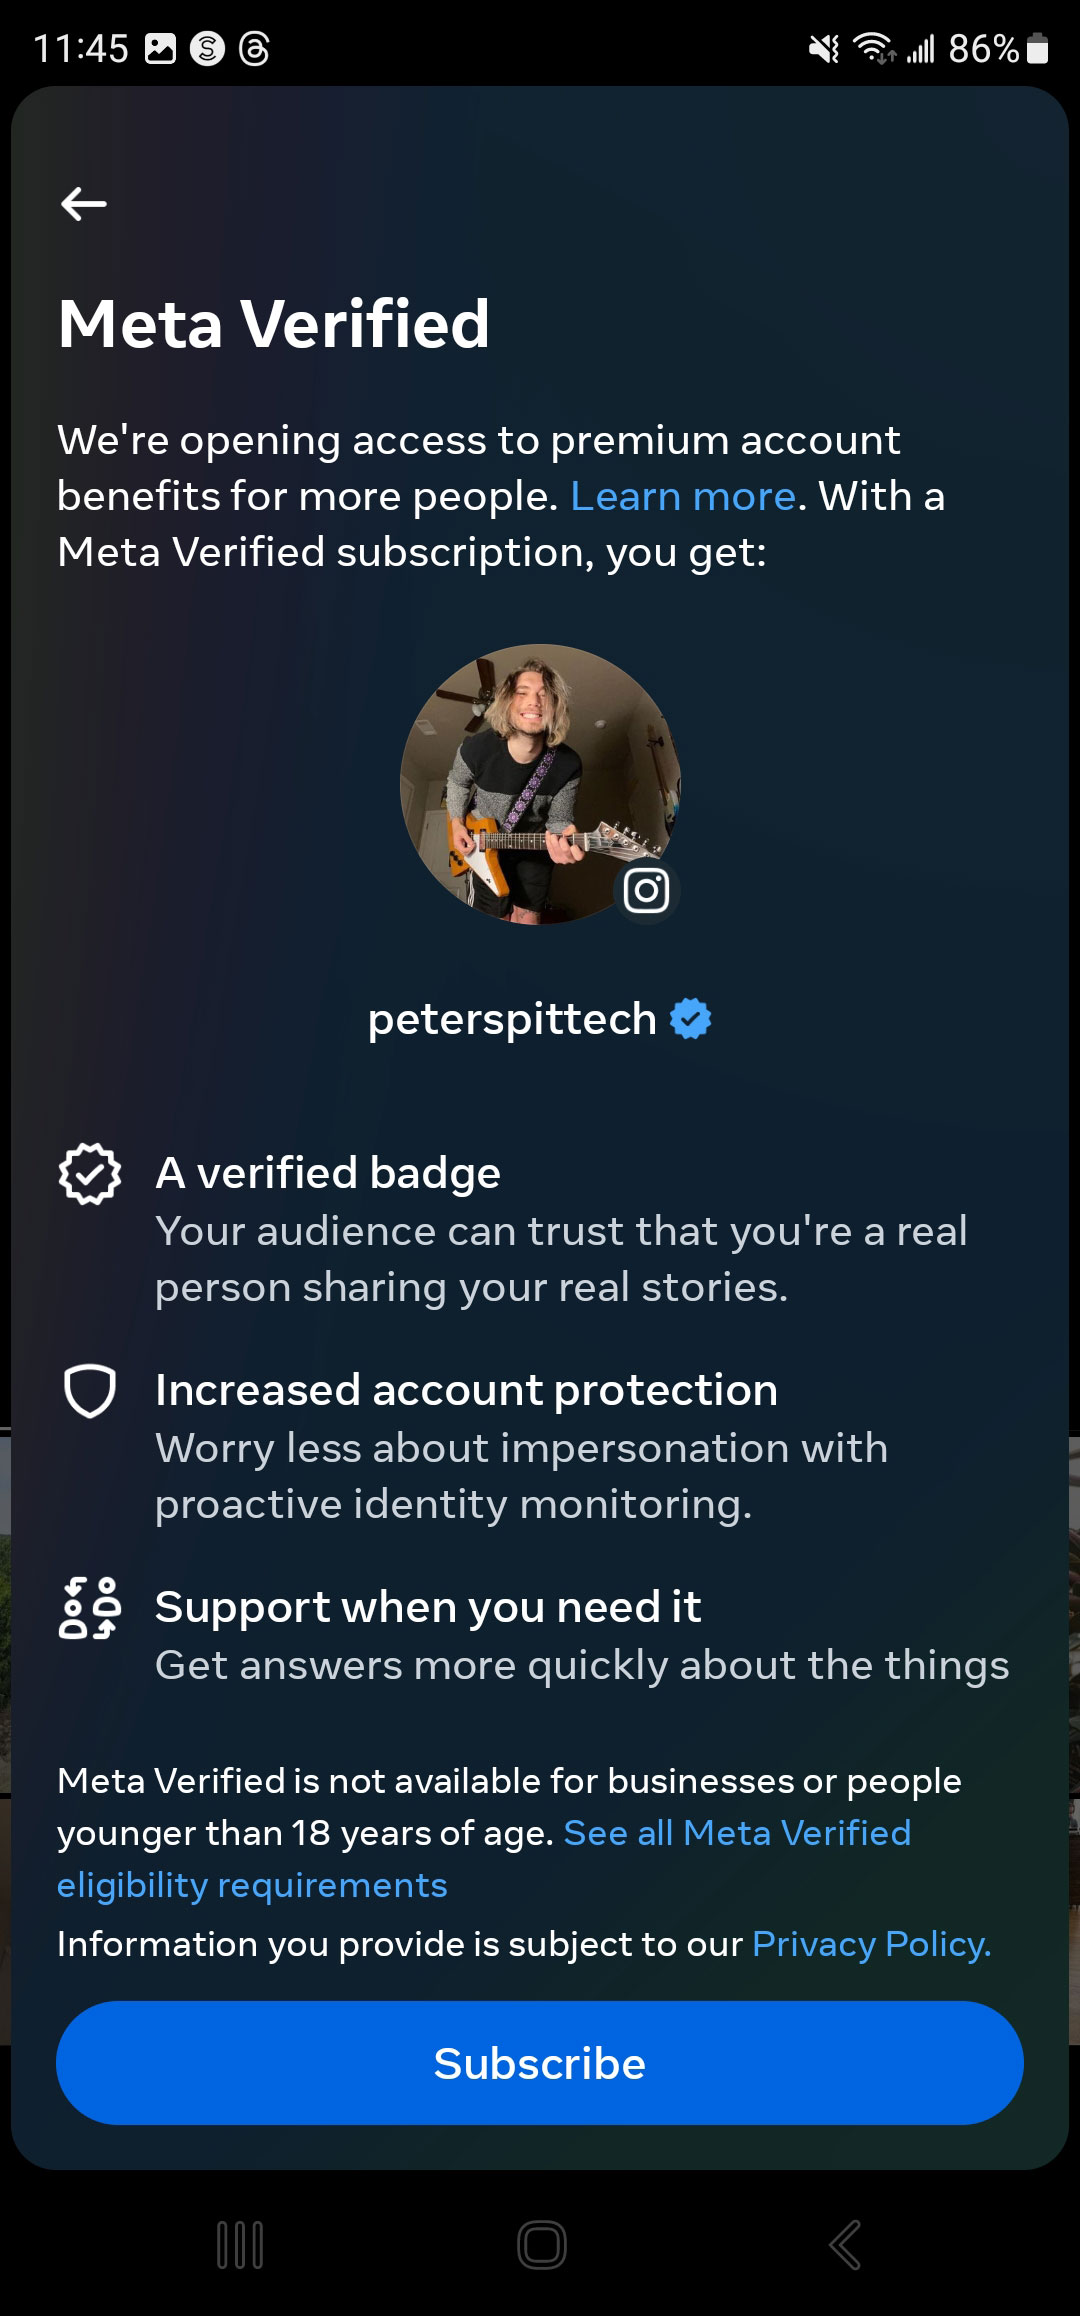 How To Get Threads Badge On Instagram 